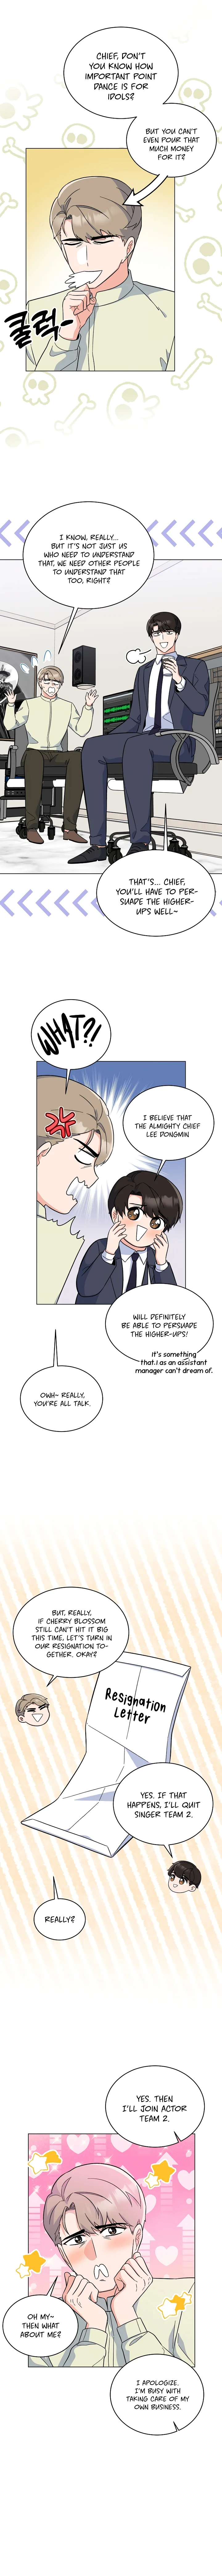 1st year Max Level Manager - Chapter 82 Page 7